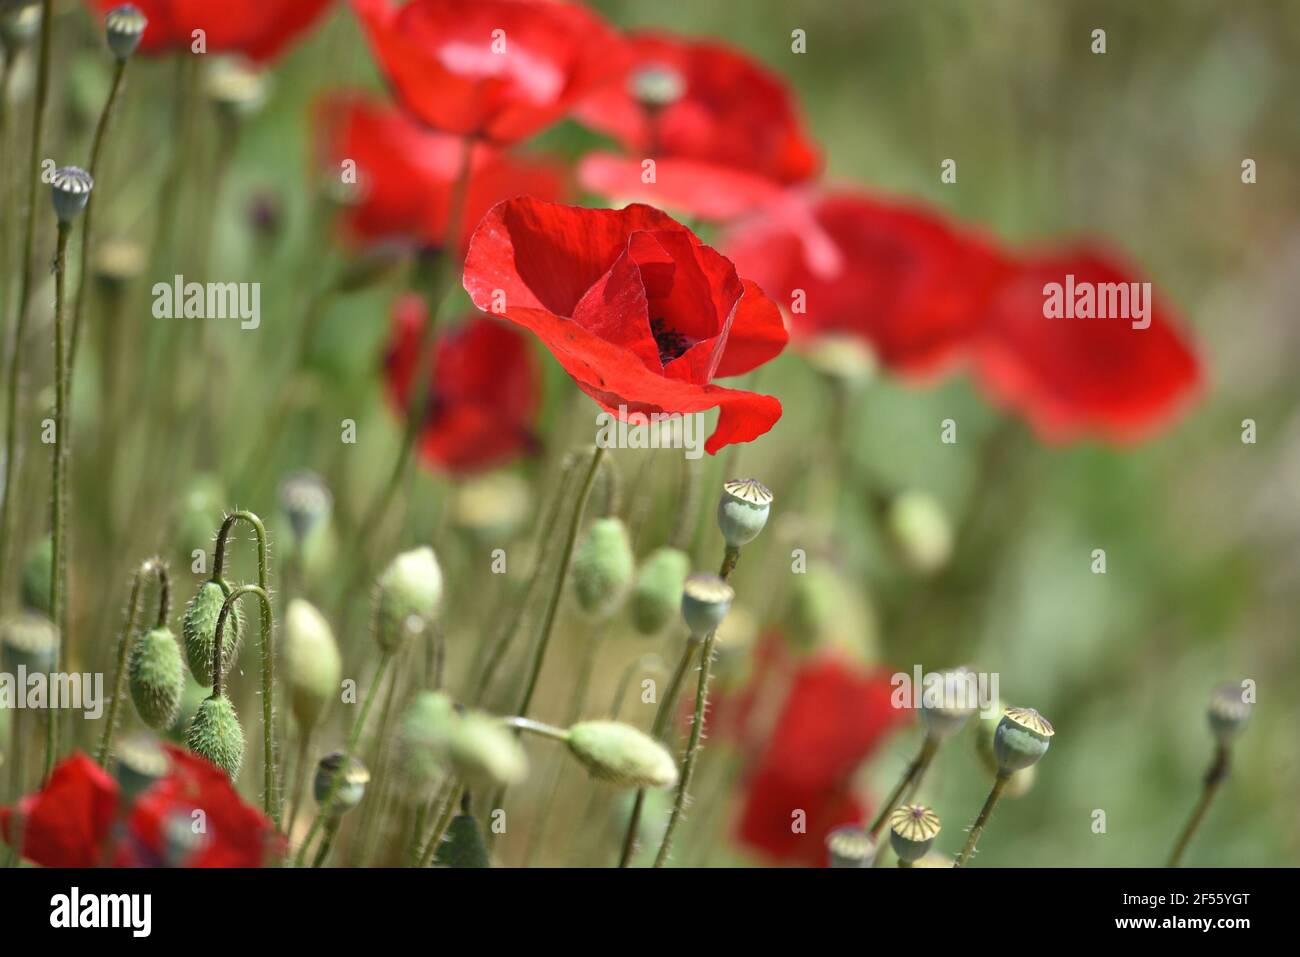 Papaver argemone a herbaceous flowering plant with scarlet flower petals on a natural springtime background. Stock Photo